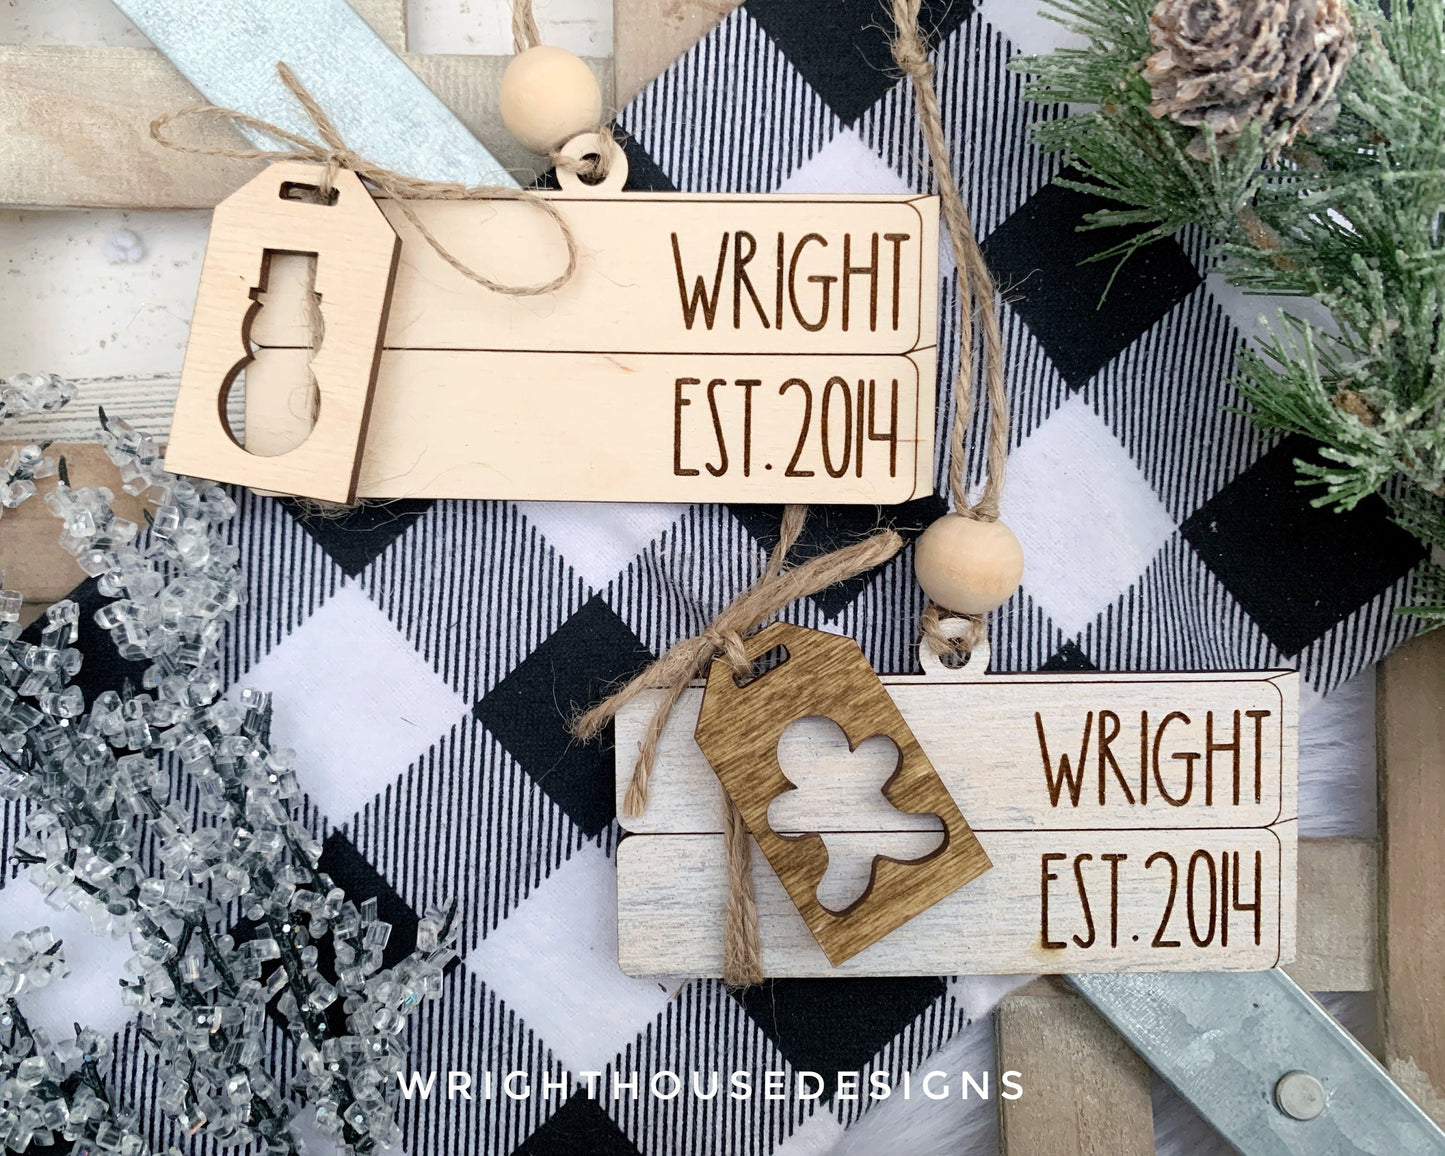 Established Bookstack Ornaments - Personalizable Family Name Ornaments and Stocking Tags - Cut File For Glowforge Lasers - Digital SVG File